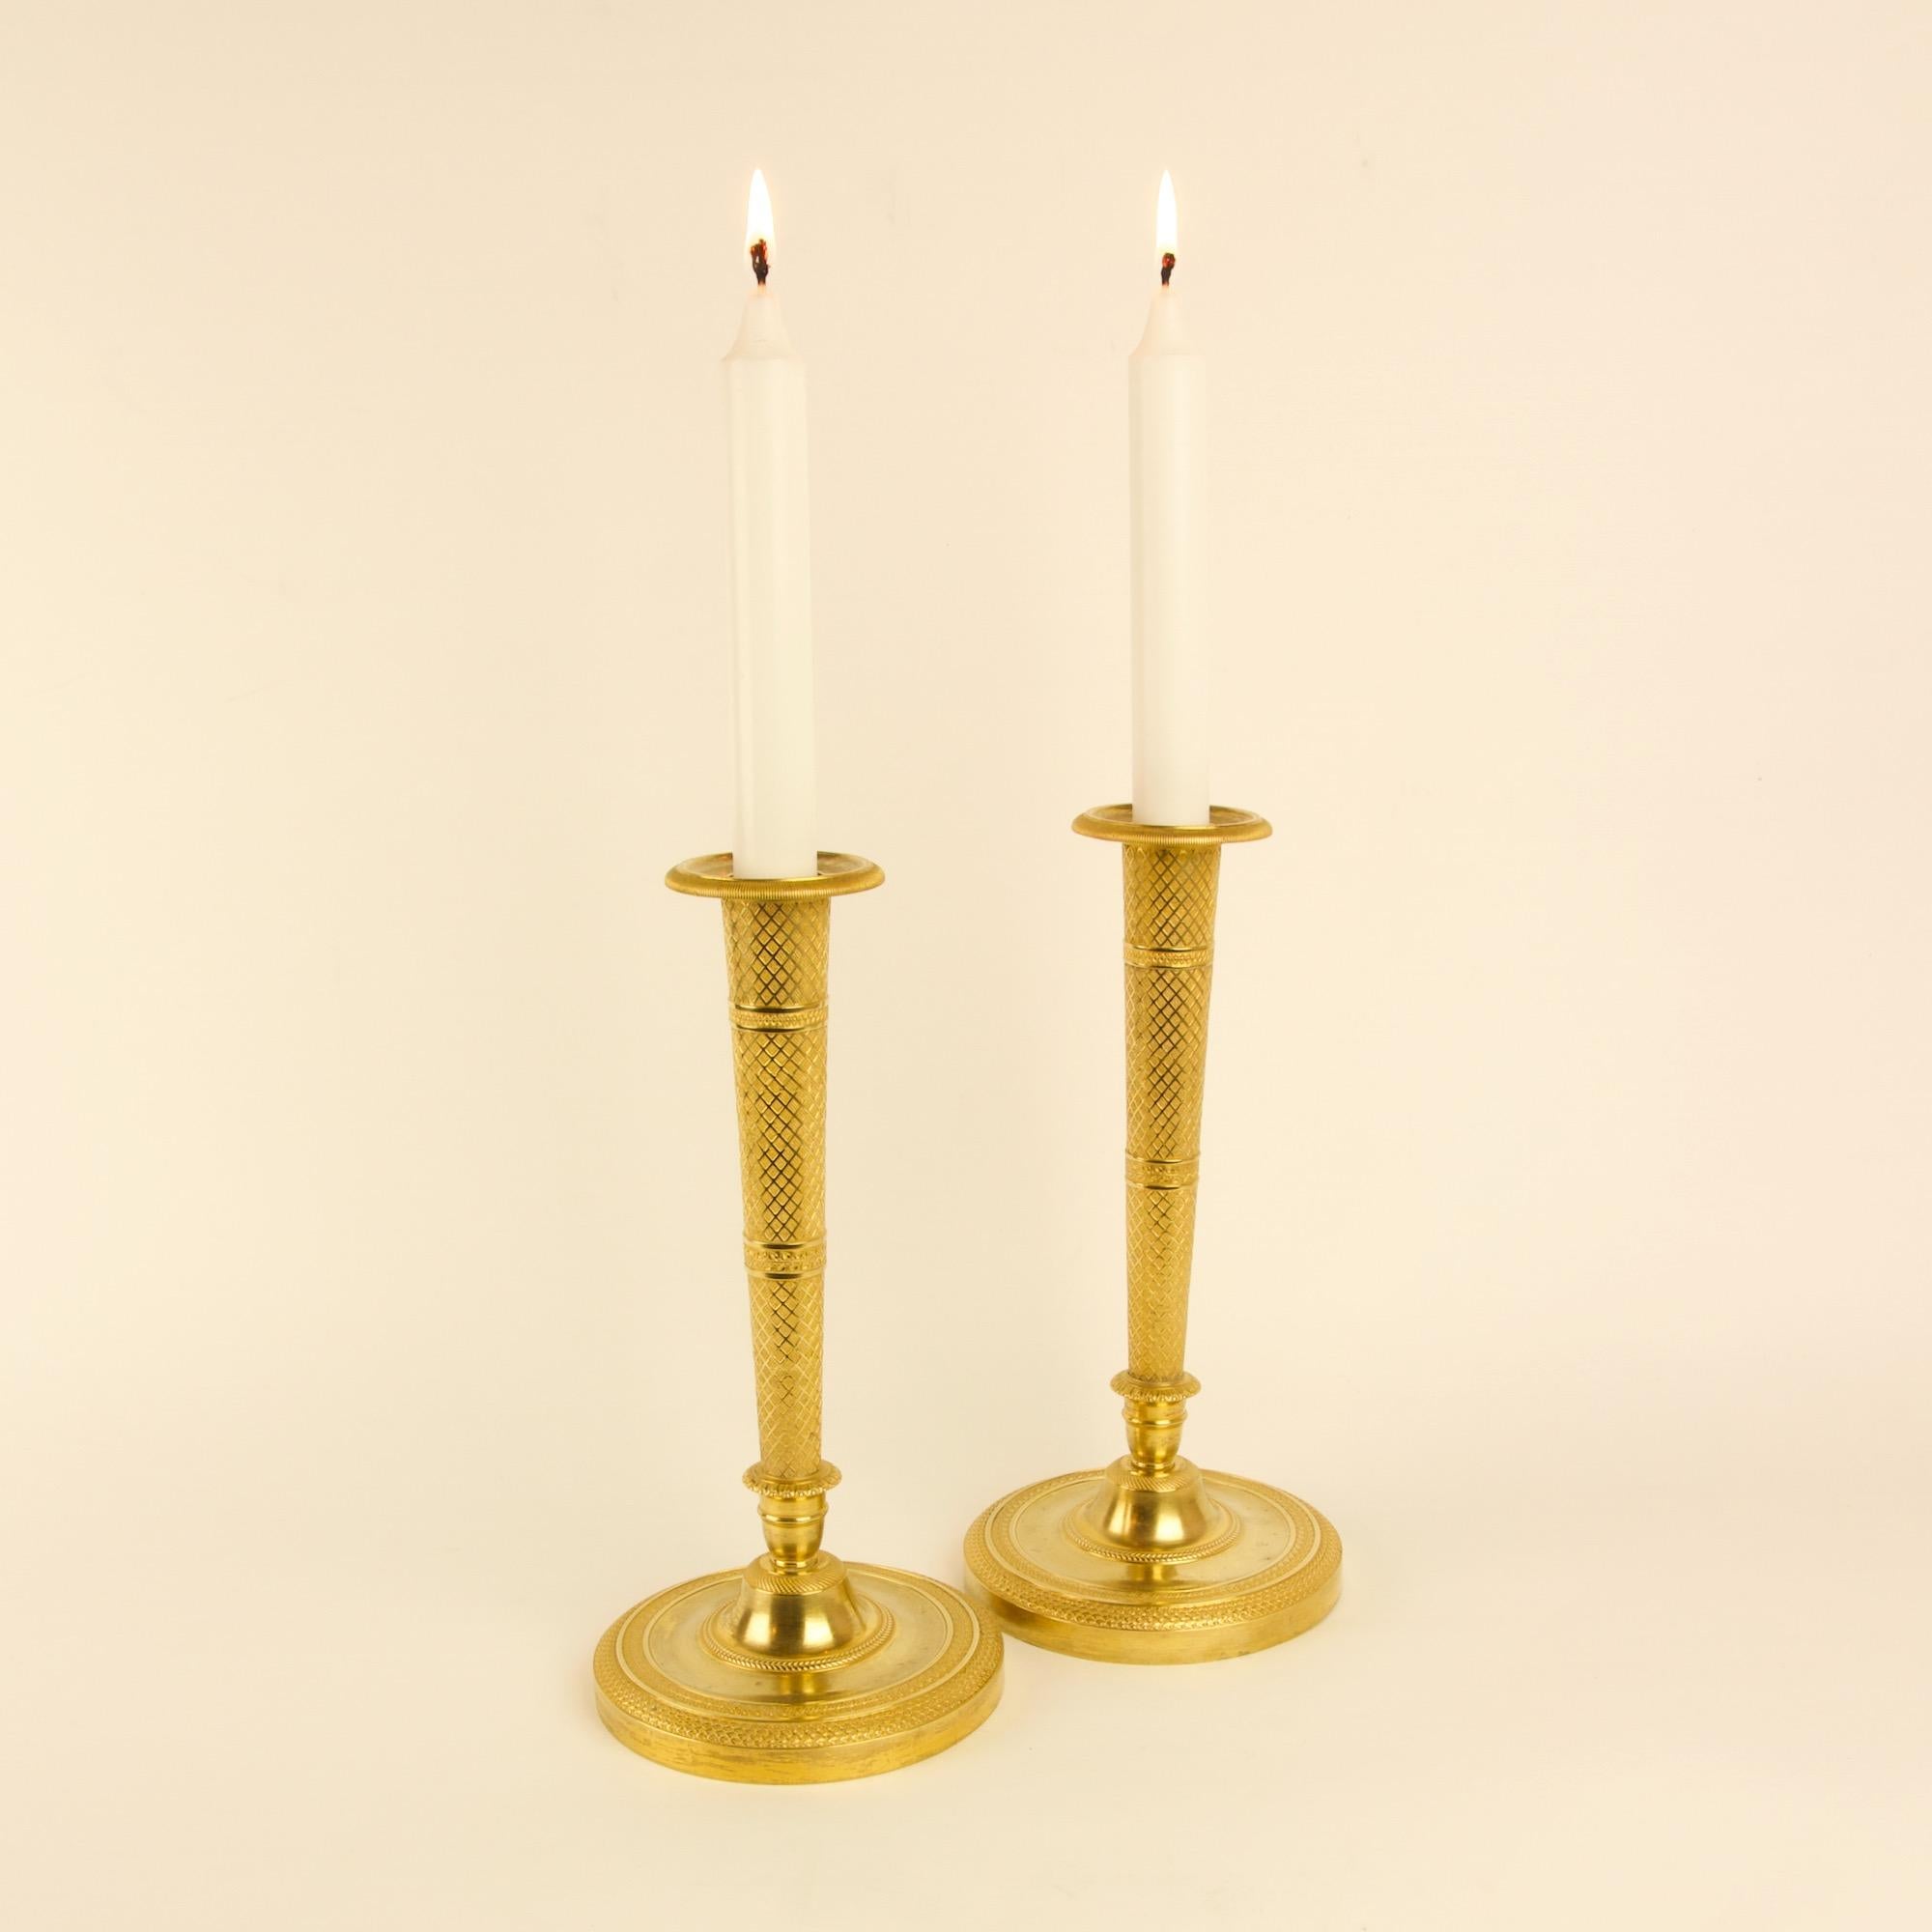 Pair of Early 19th Century French Empire Gilt Bronze Candlesticks after C. Galle In Good Condition For Sale In Berlin, DE